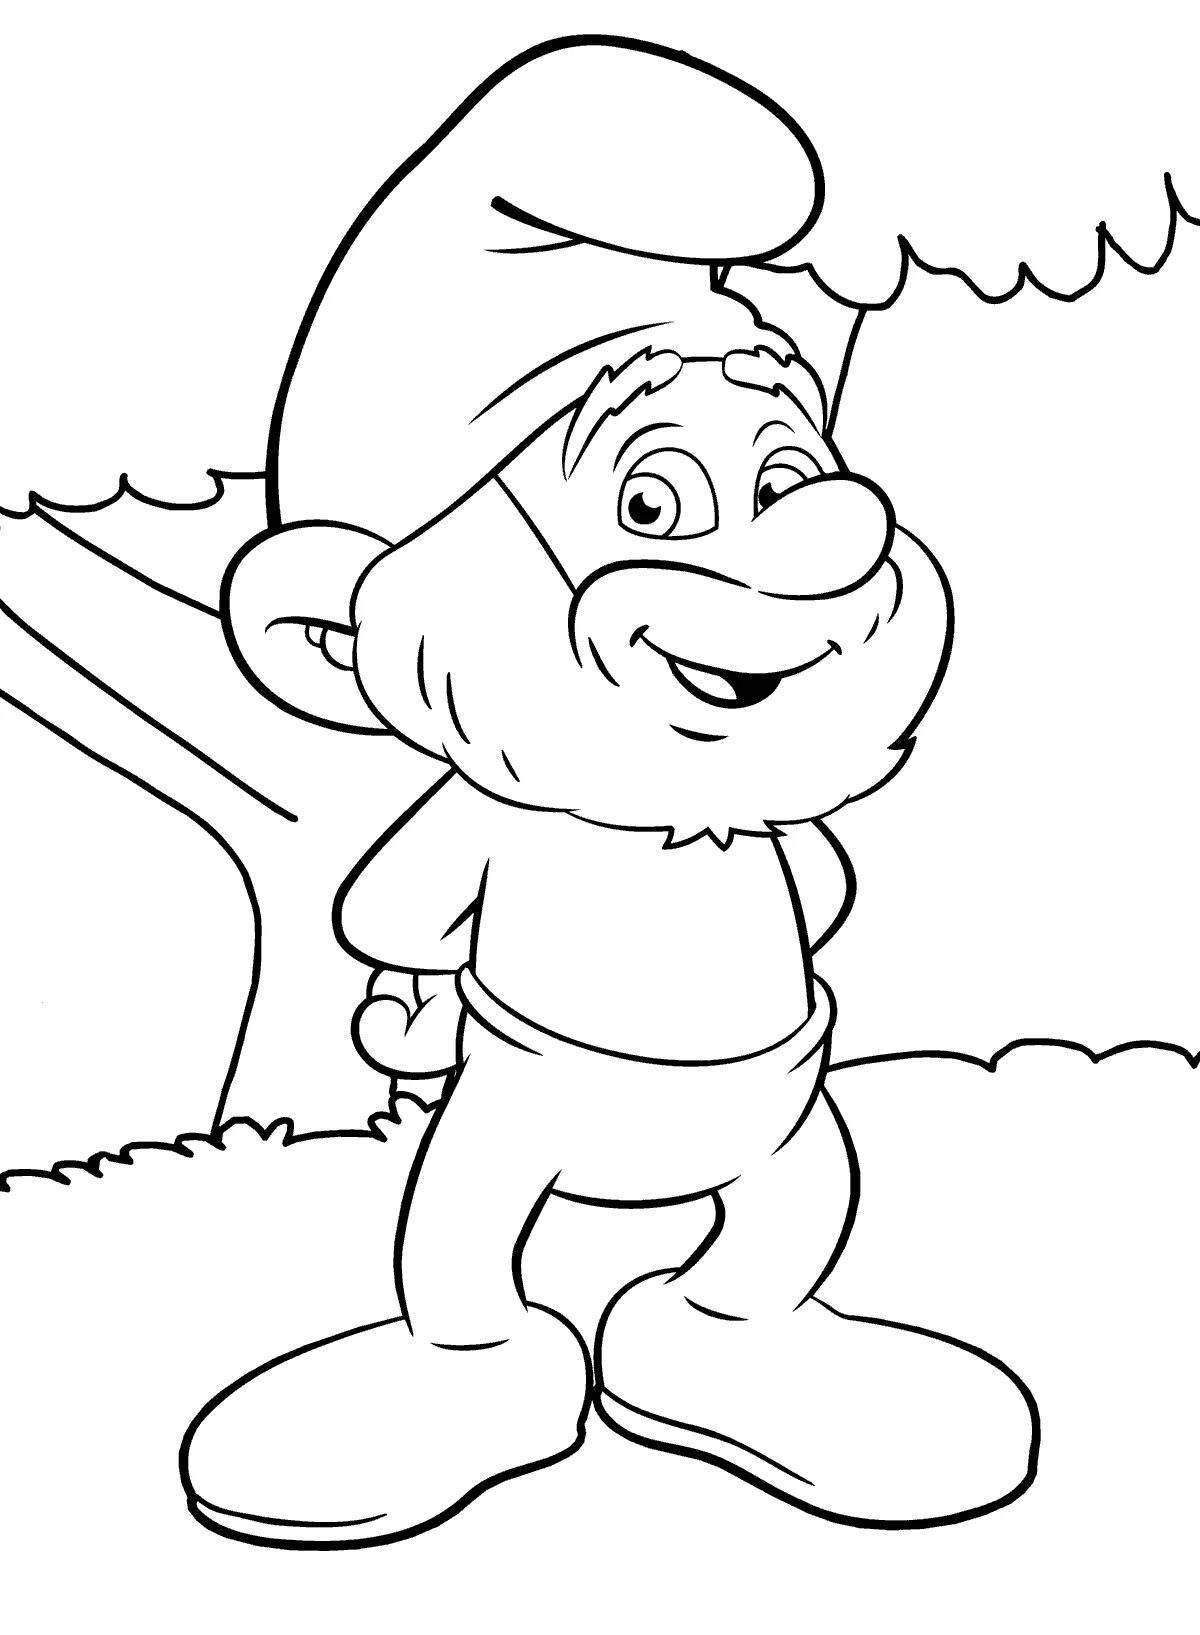 Innovative cartoon characters coloring book for 3-4 year olds